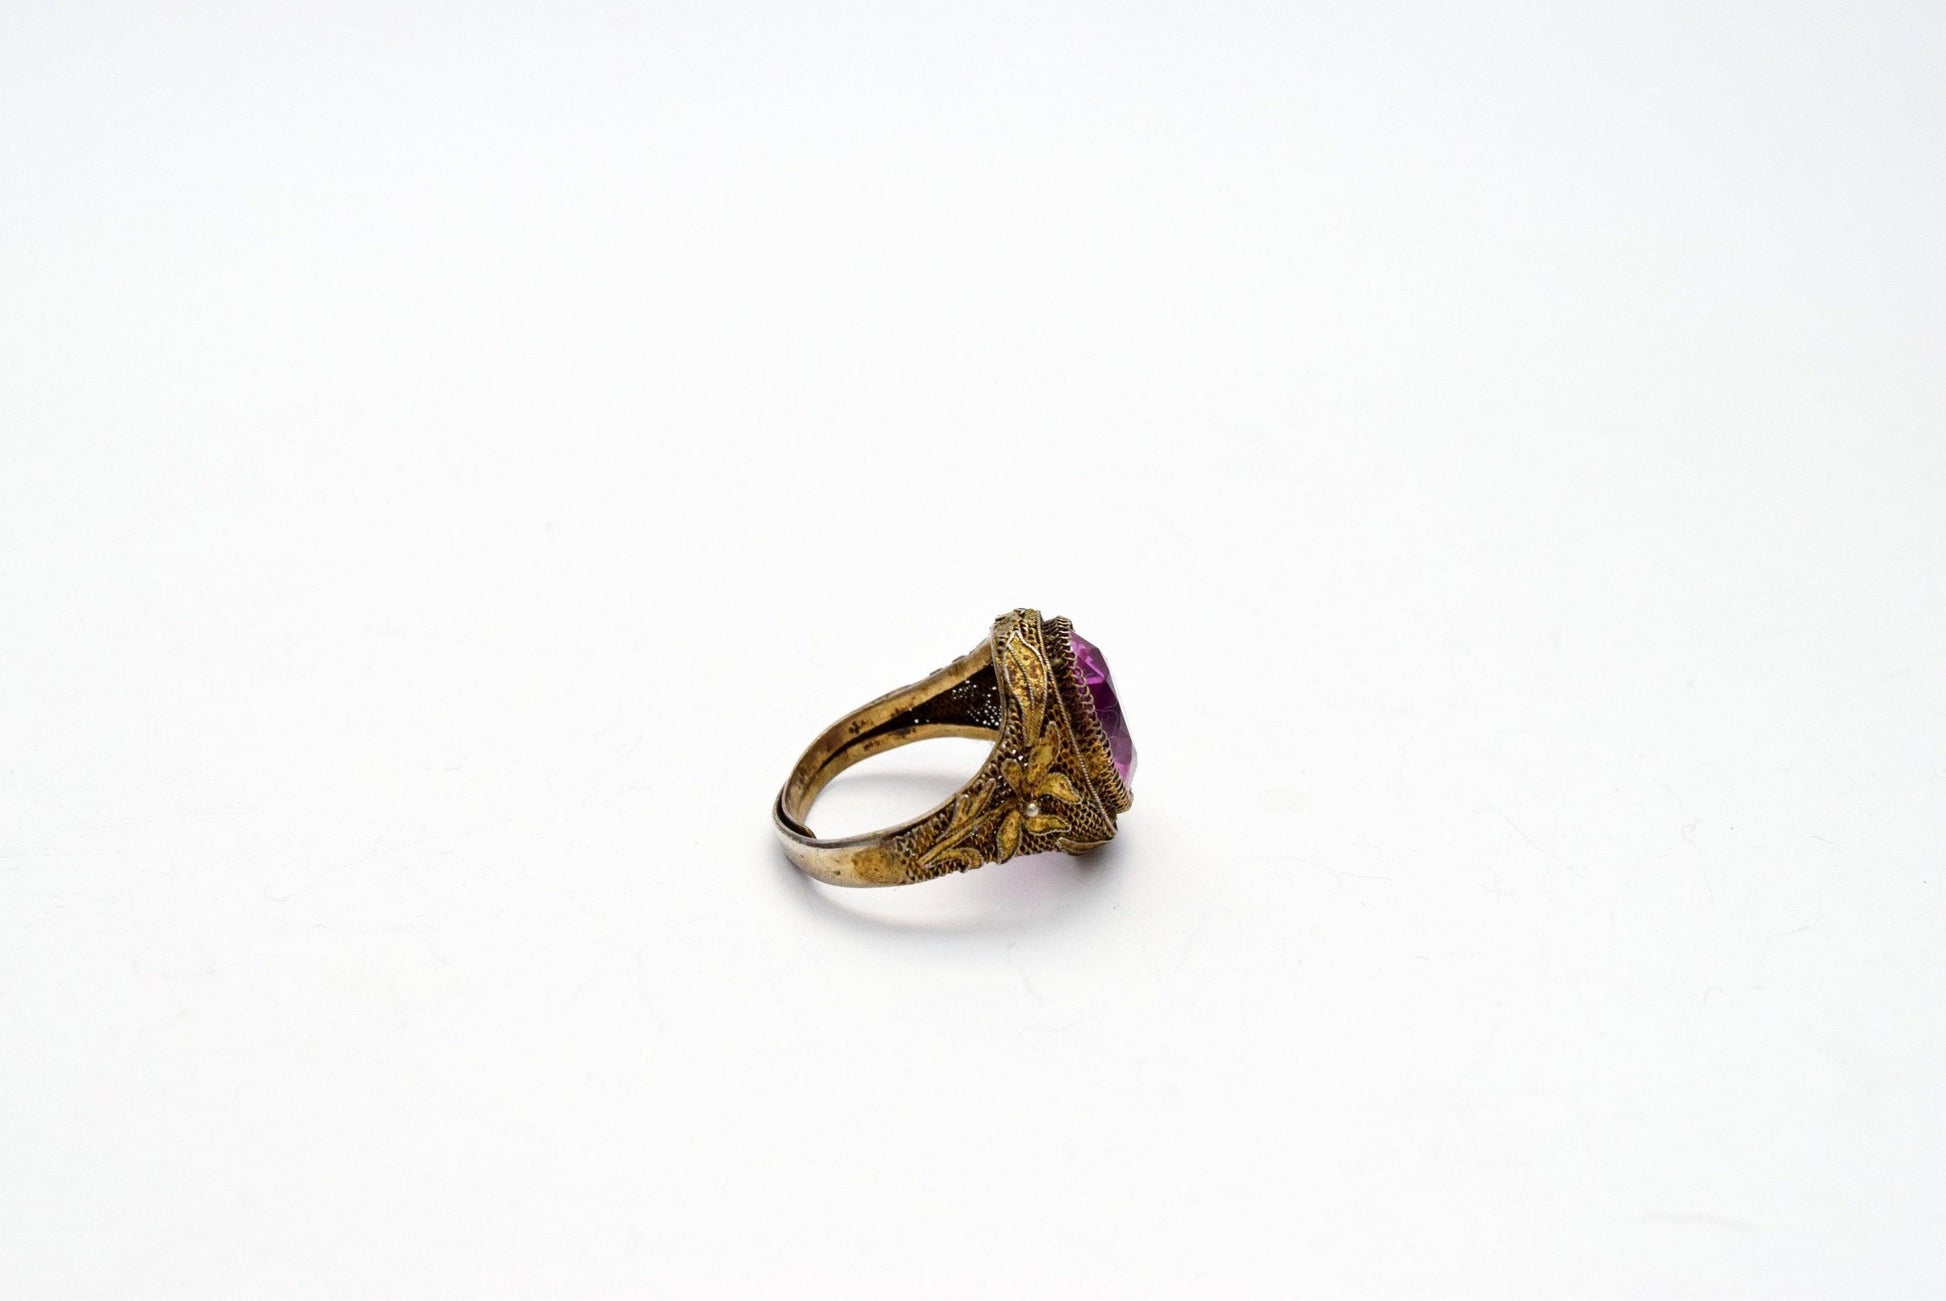 Chinese Export Ring with Purple Oval Cabochon - Anteeka